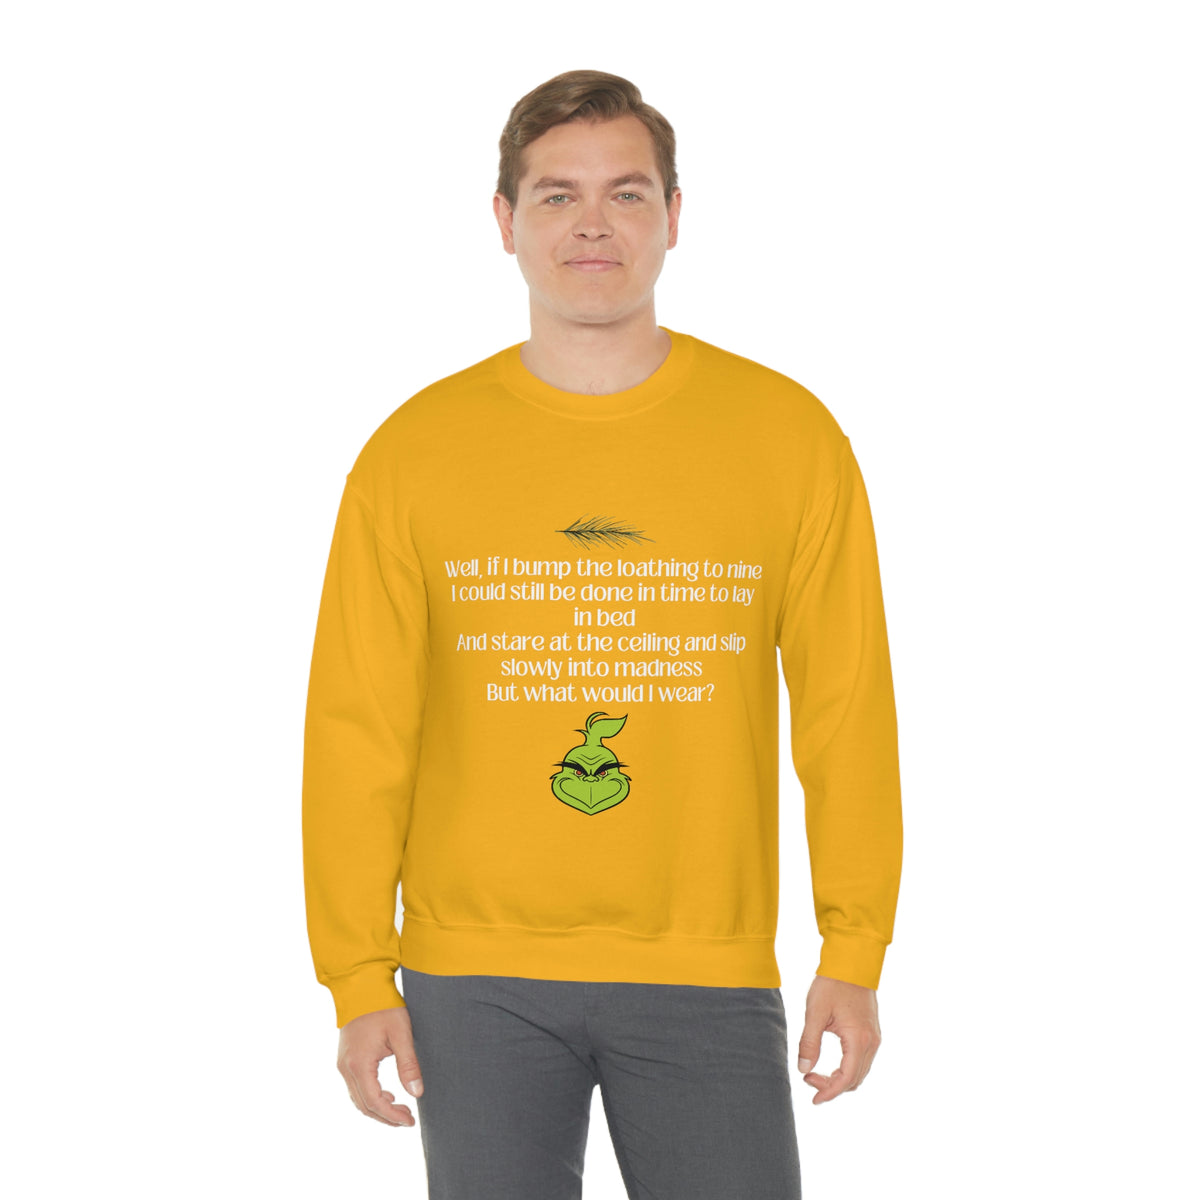 The Grinch Anxiety Sweatshirt, Grinch Humor Crewneck, Holiday Giftable Top, The Grinch